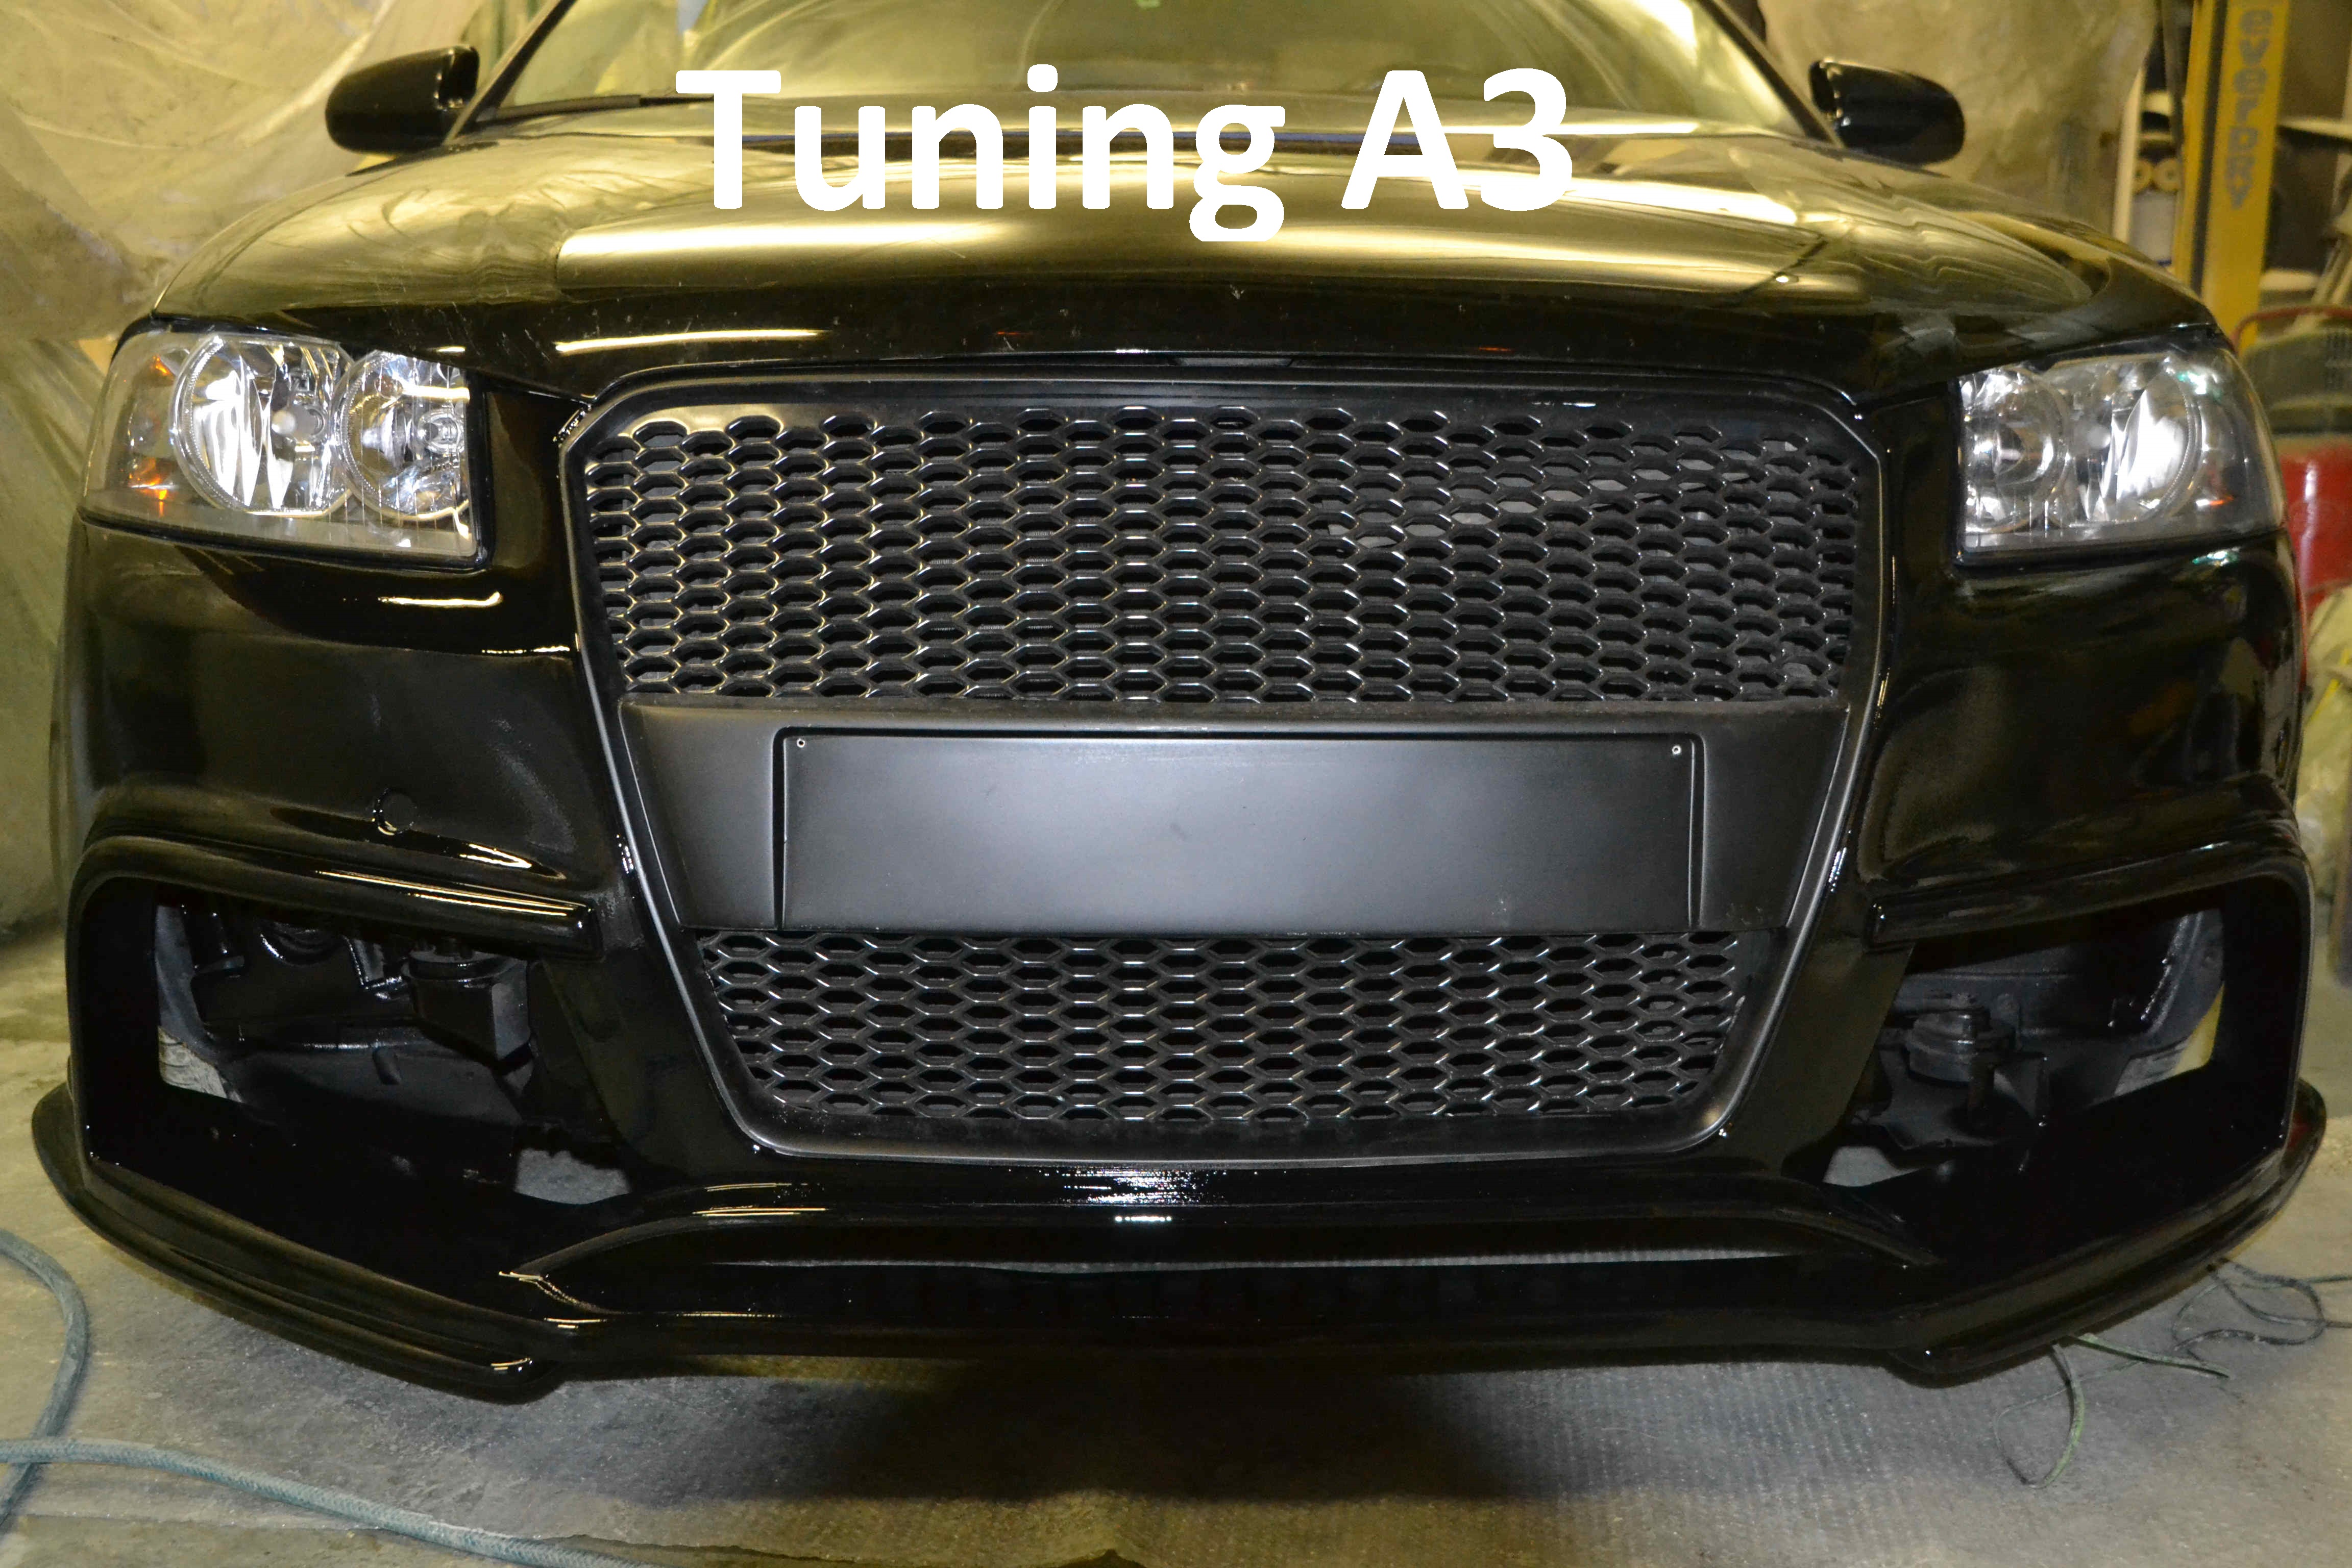 afbeelding van een audi A3, tuning A3, tuning voorbumper, tuning achterbumper, kit A3, polyester werk A3, polyester kit A3